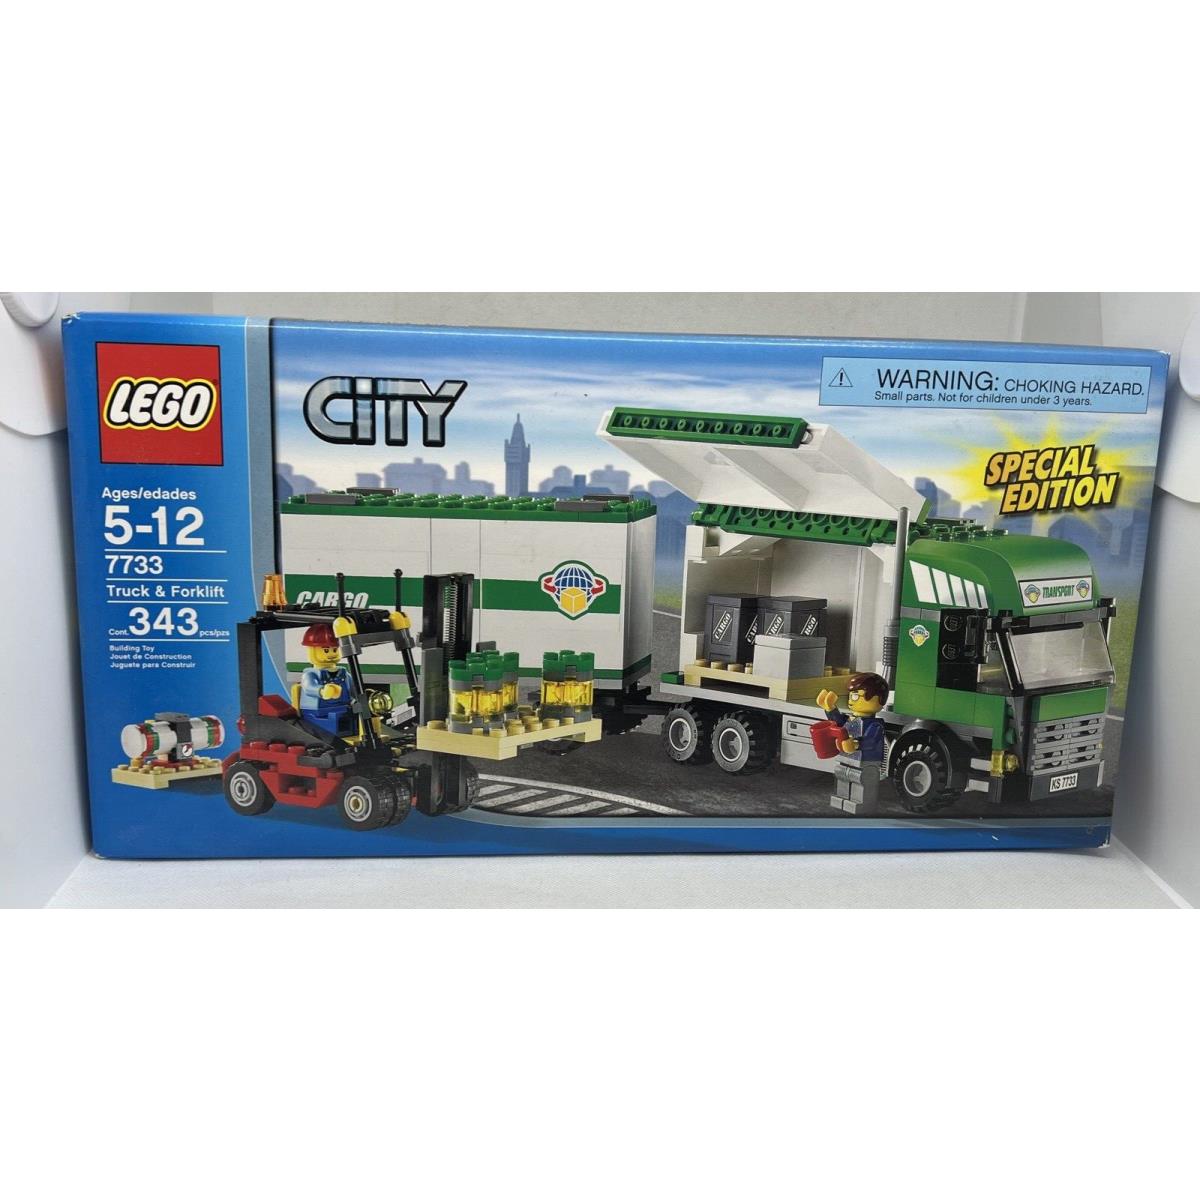 2008 Lego 7733 City Truck Forklift with 2 Minifigures